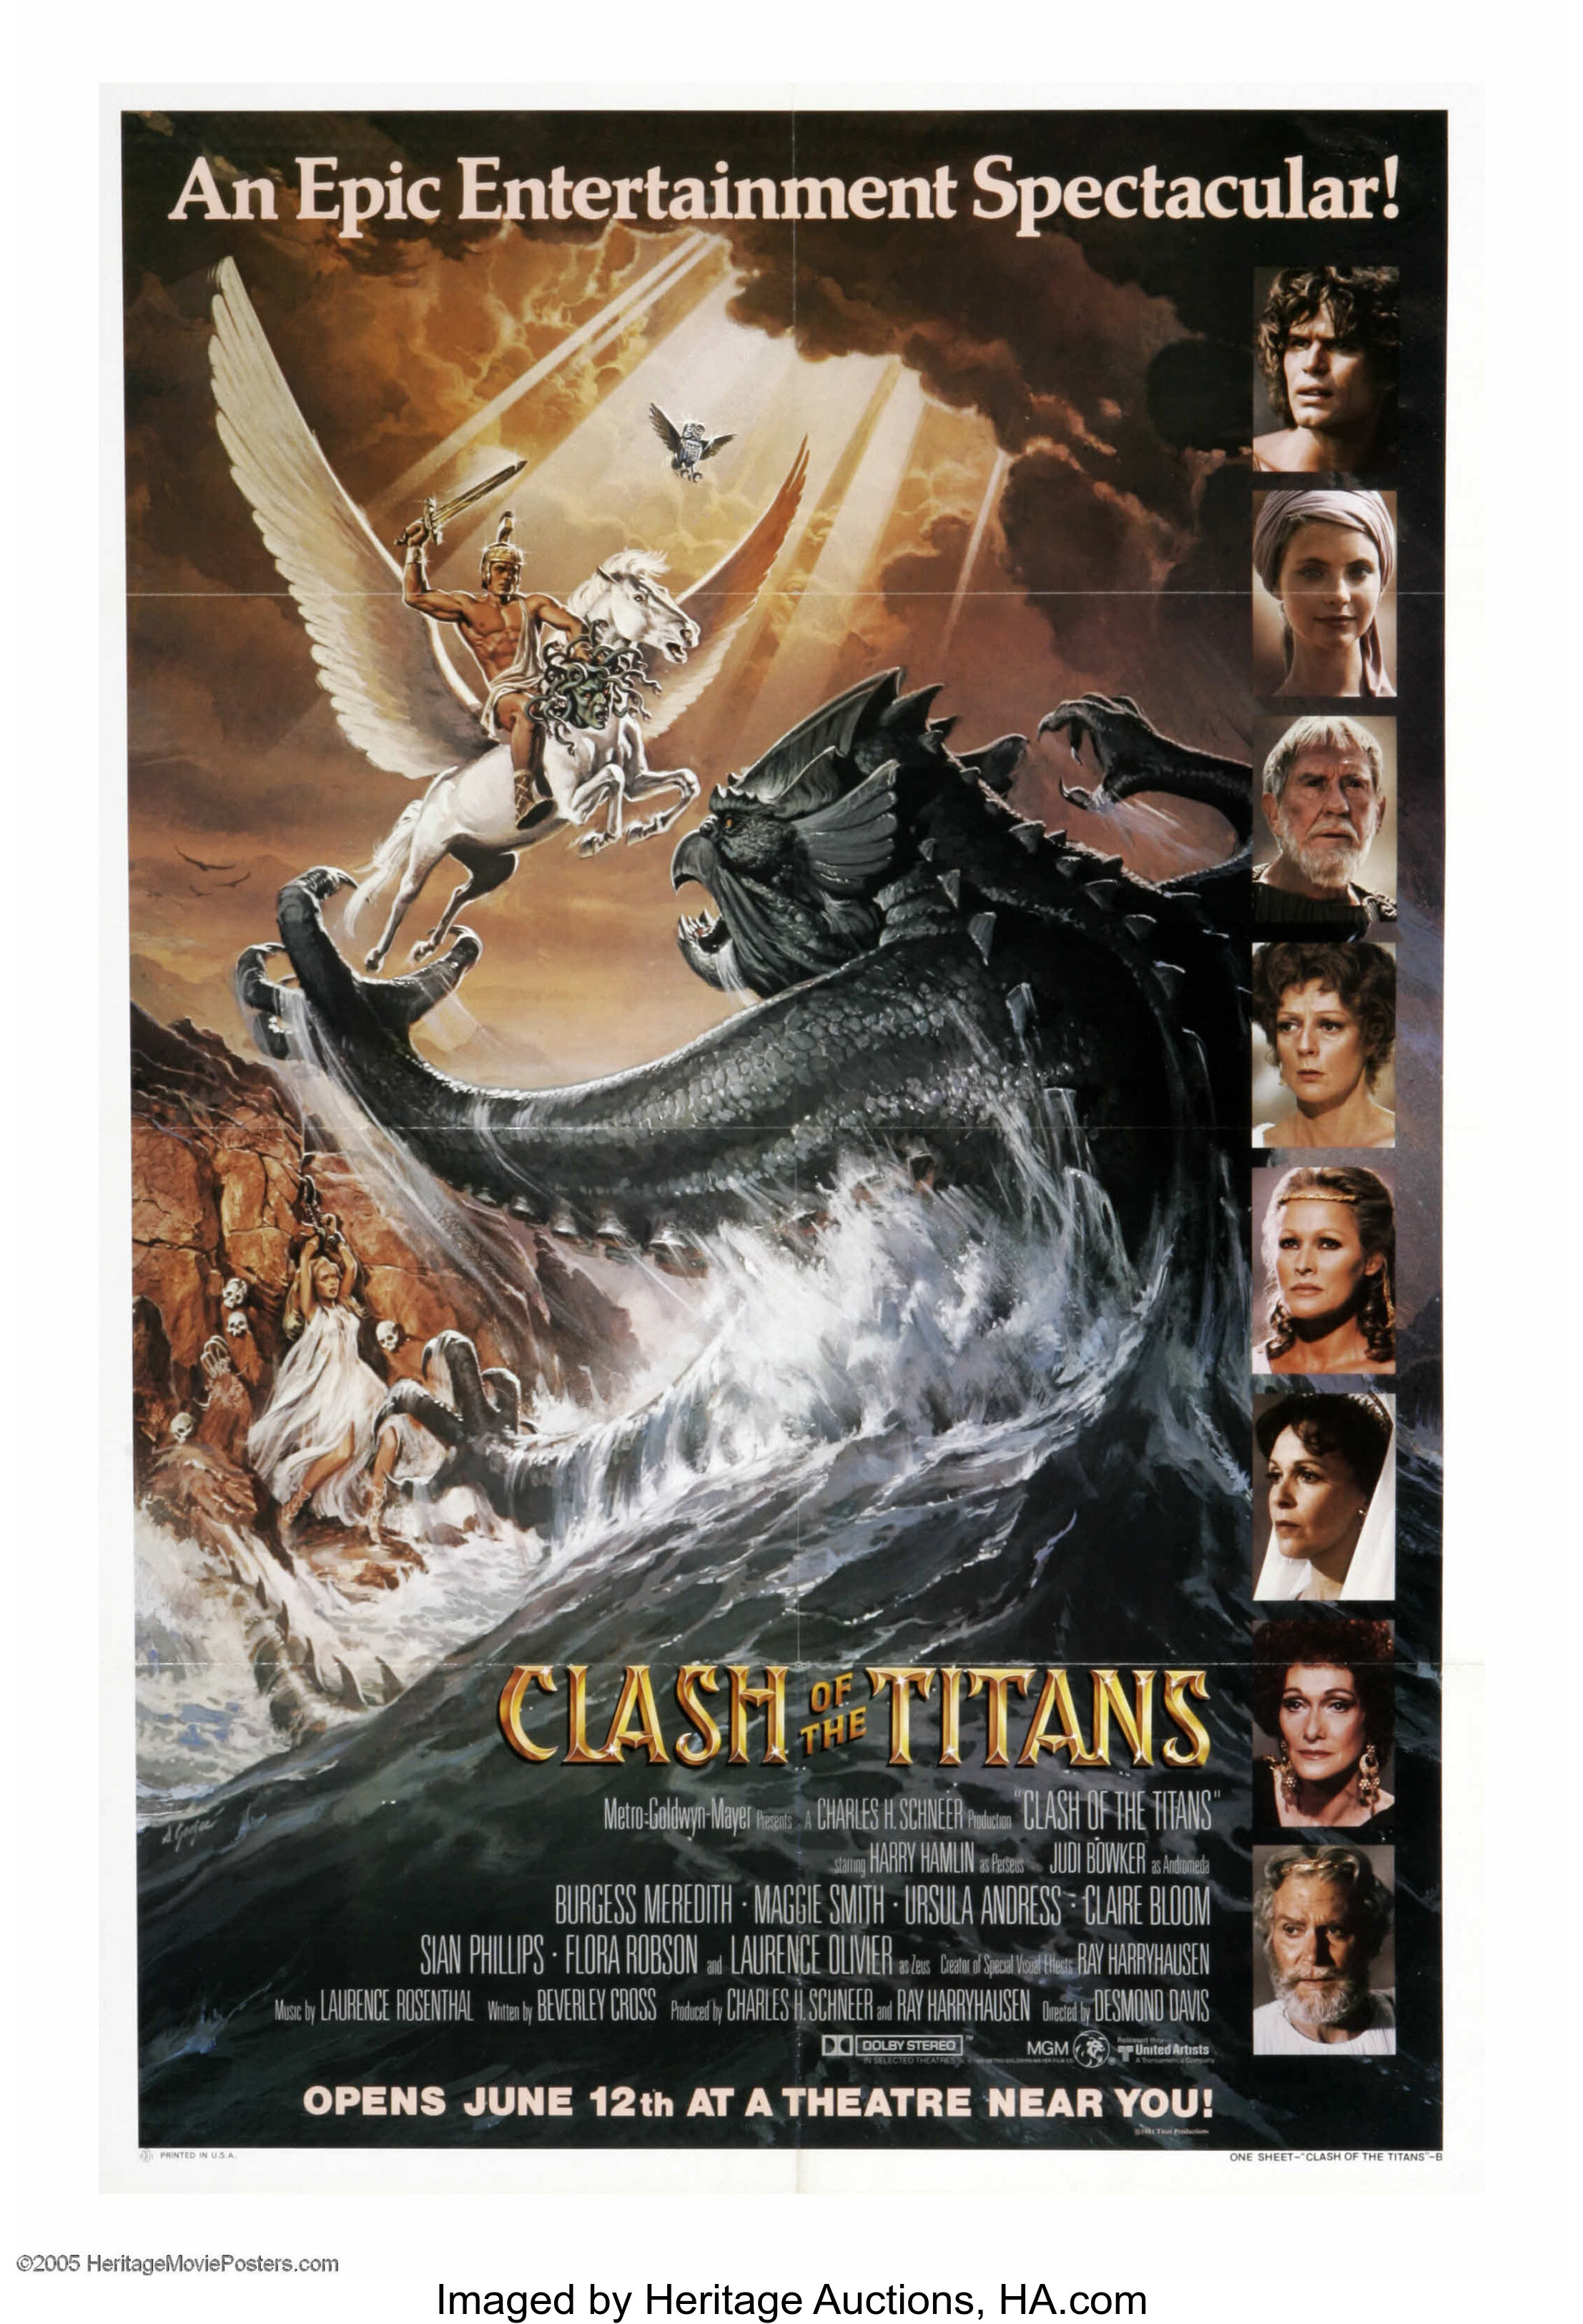 Clash of the Titans (1981) - Technical specifications - IMDb